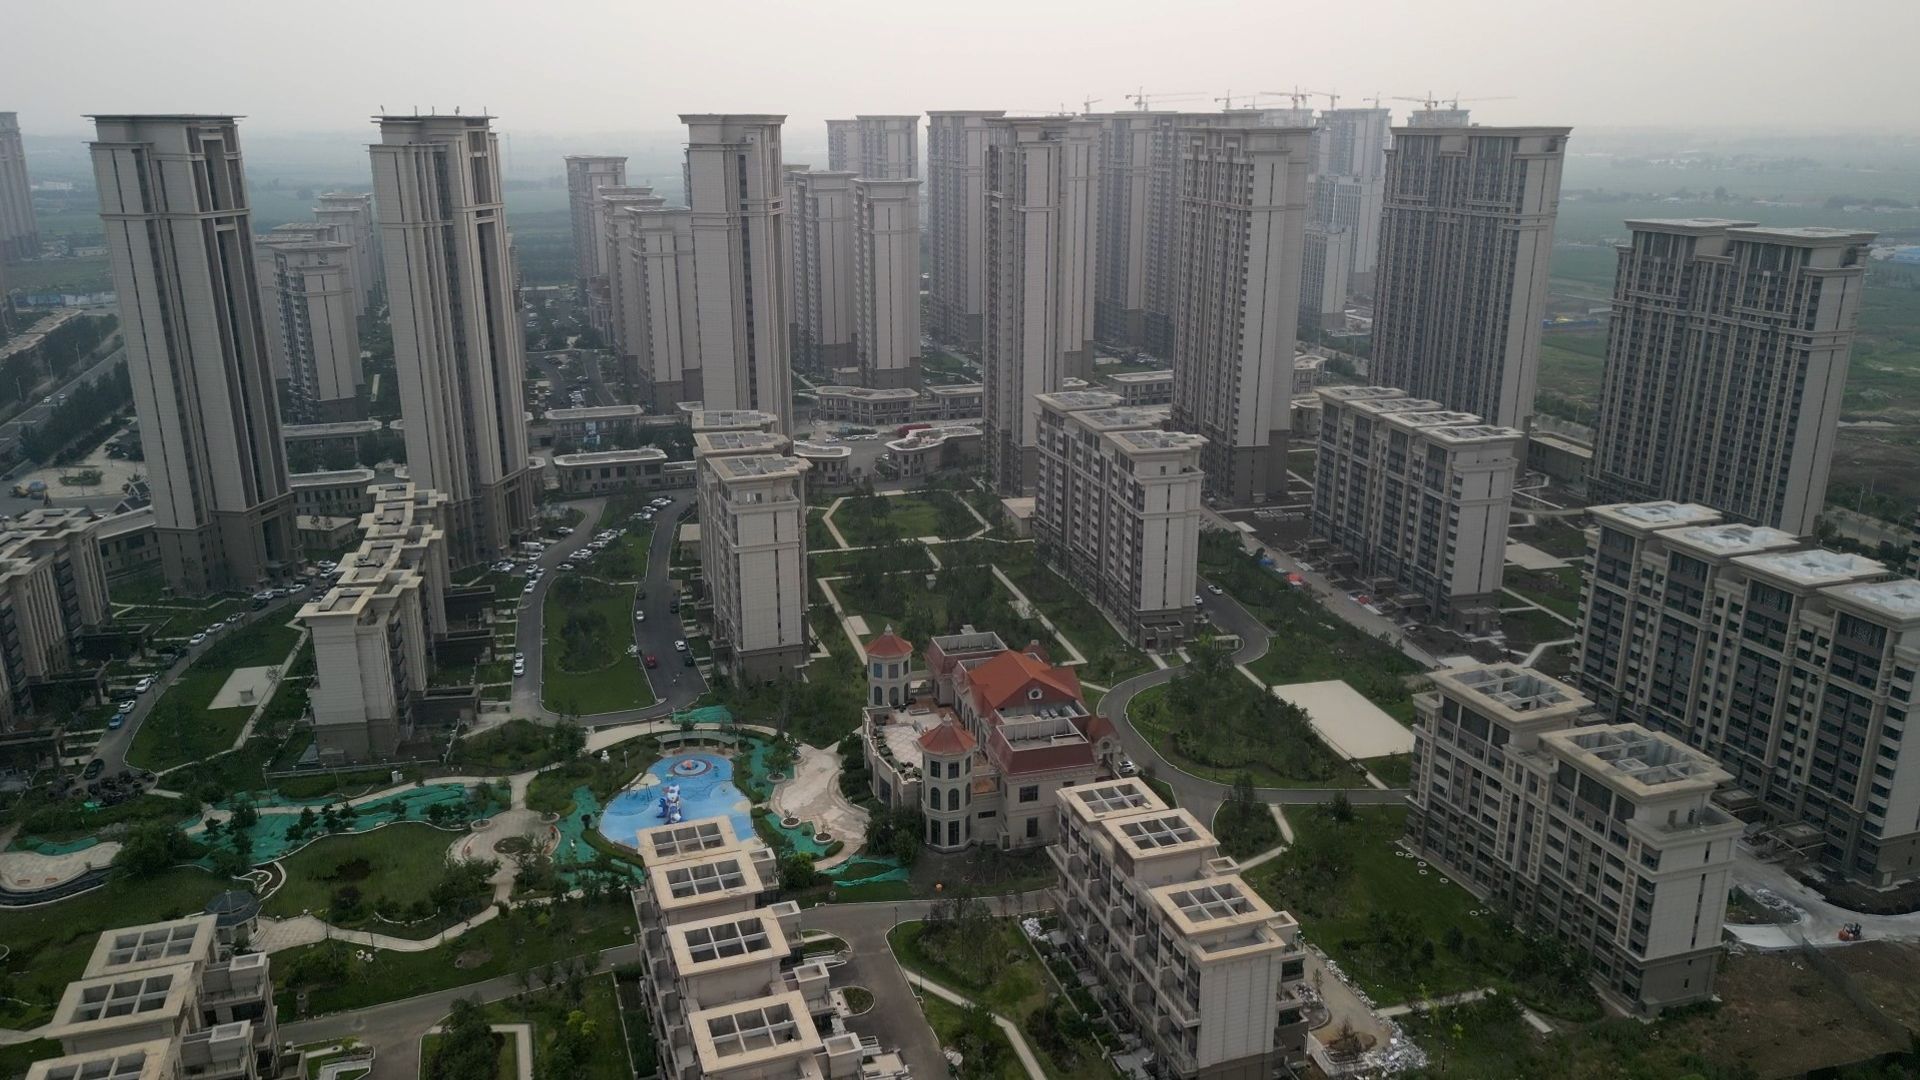 Sold a false dream: Inside China's derelict developments - and the 'bleak' reality for families